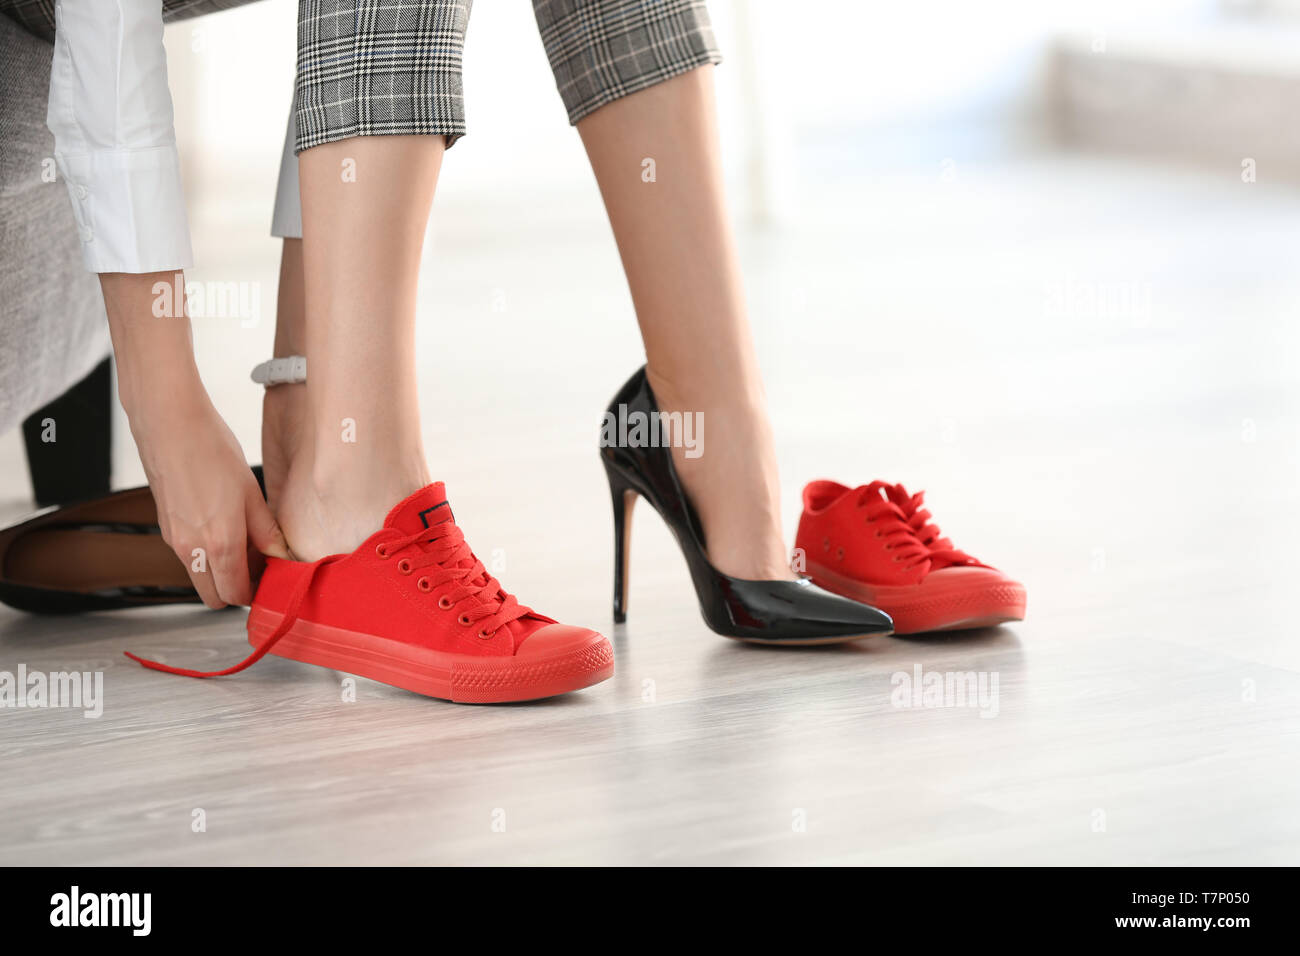 Tired woman changing shoes indoors Stock Photo - Alamy